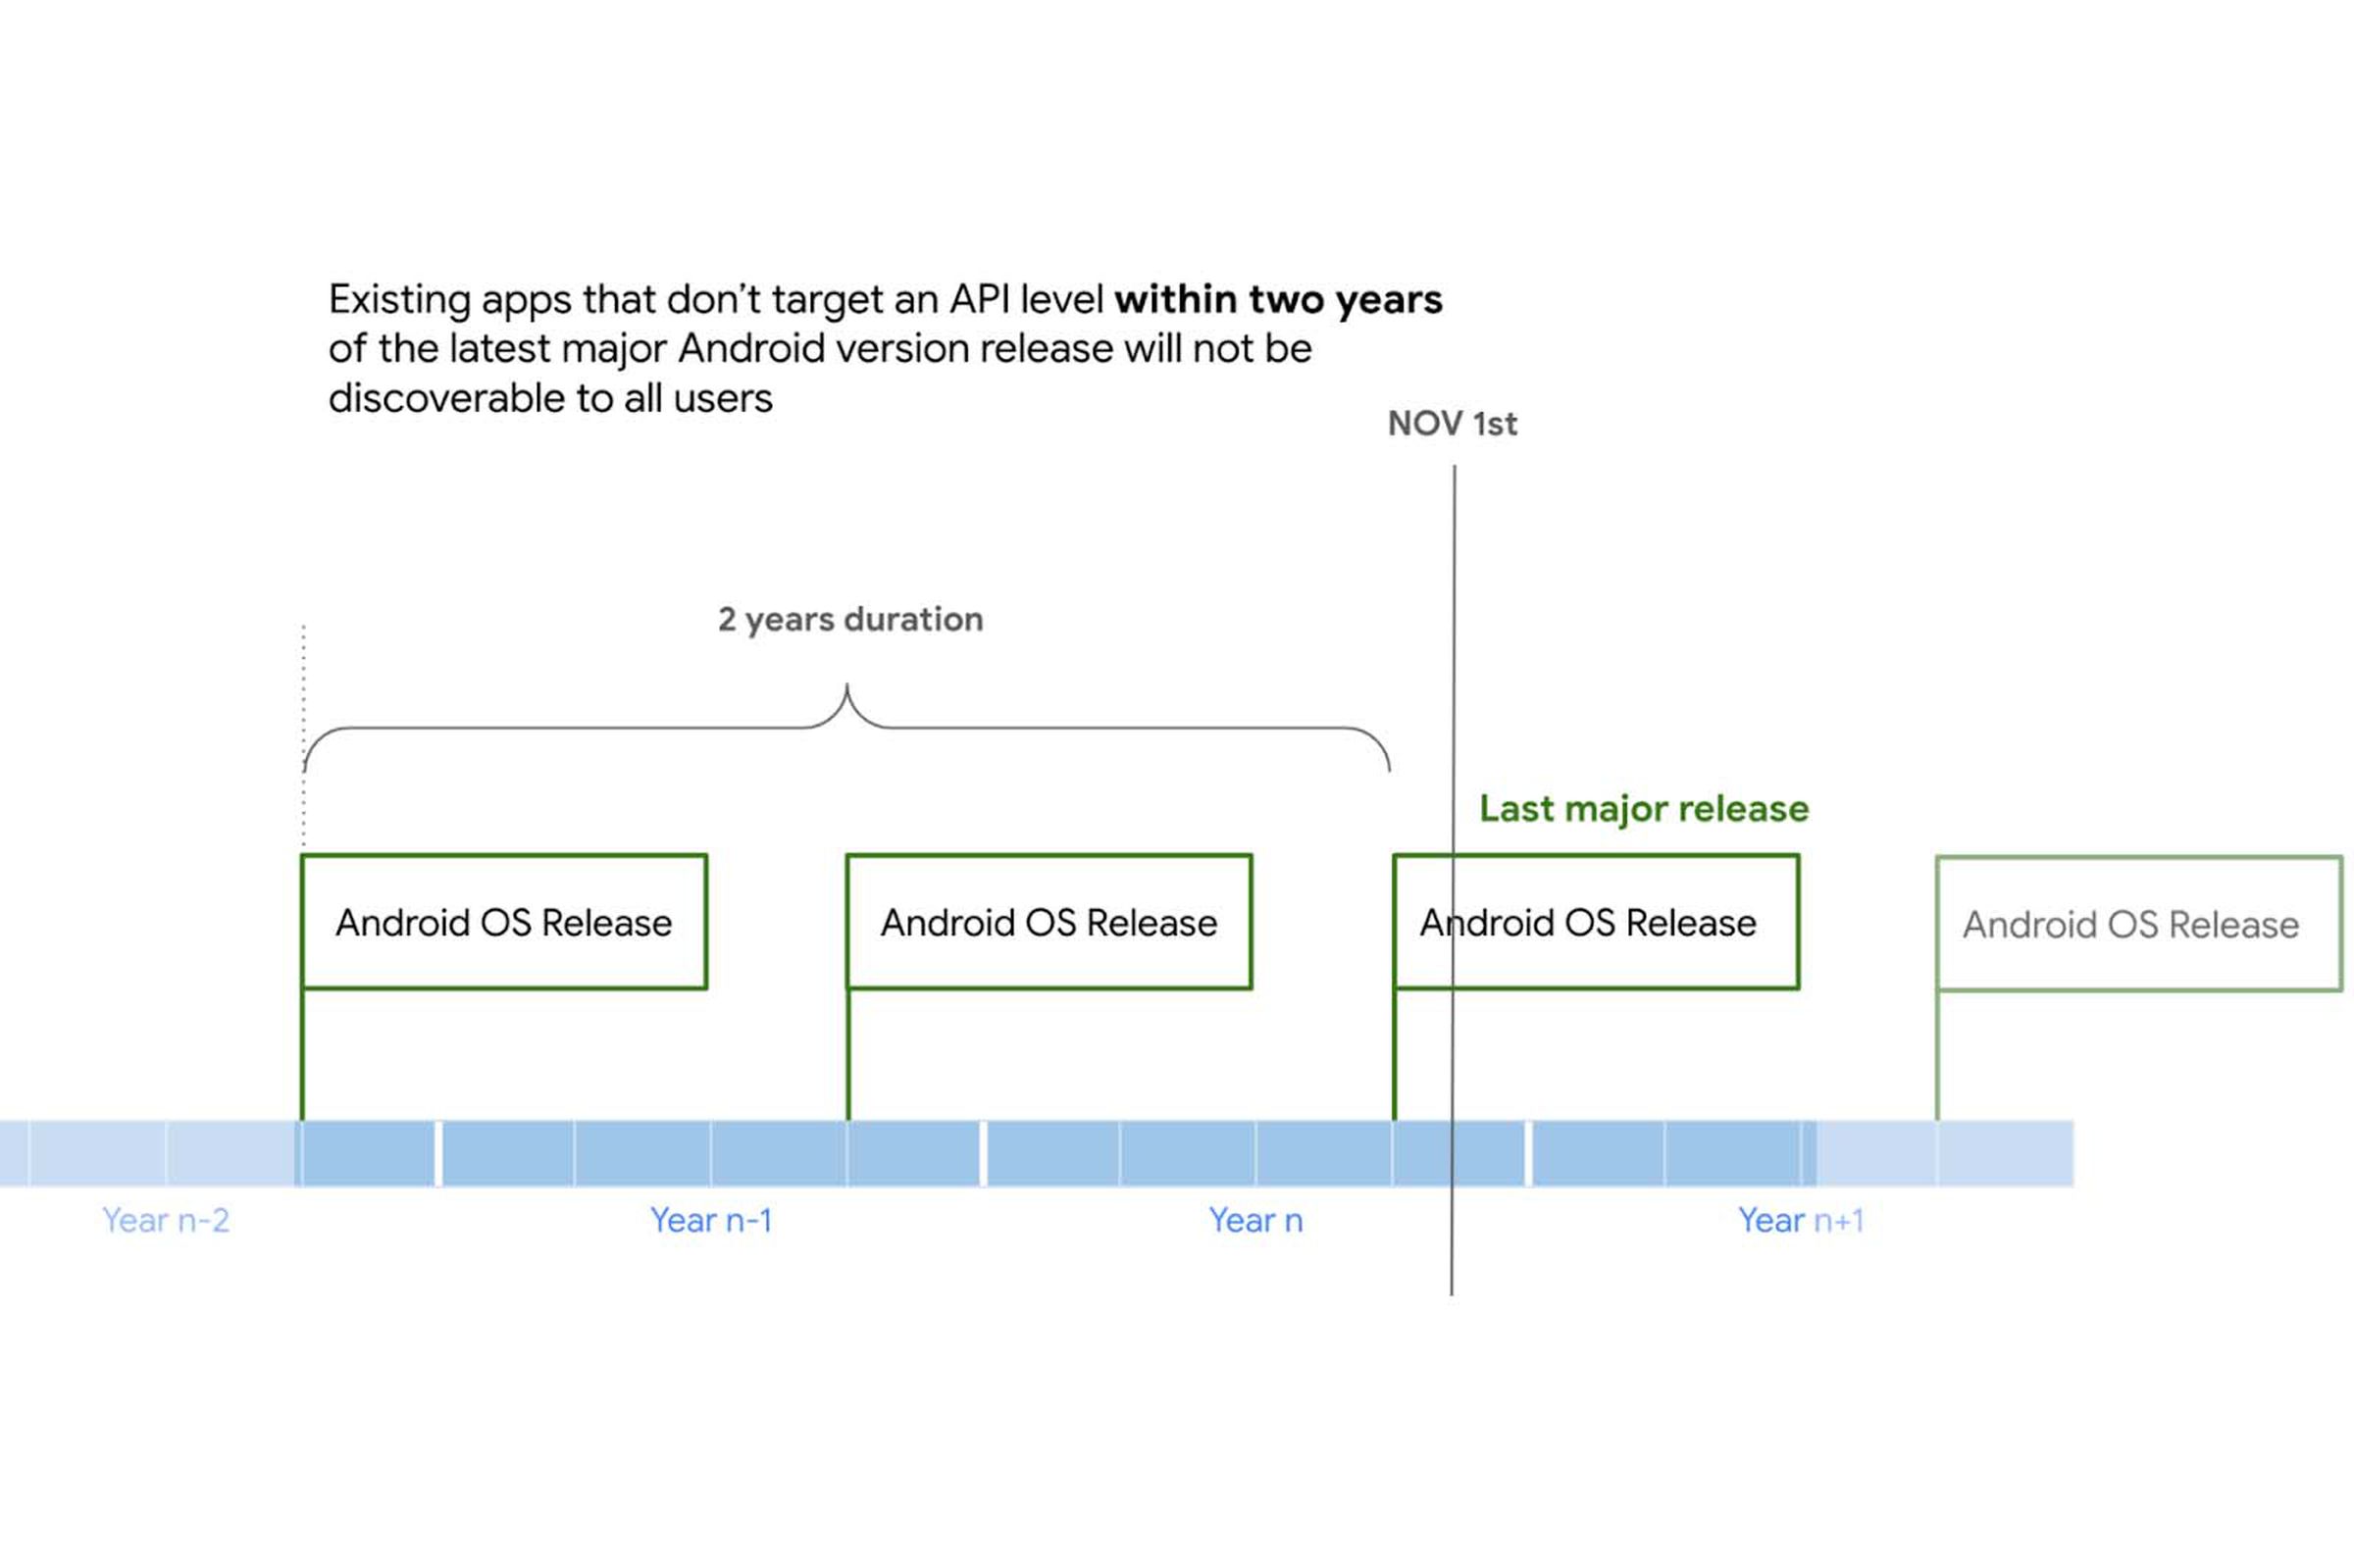 Apps must target an API level within two years of the latest major Android OS release.